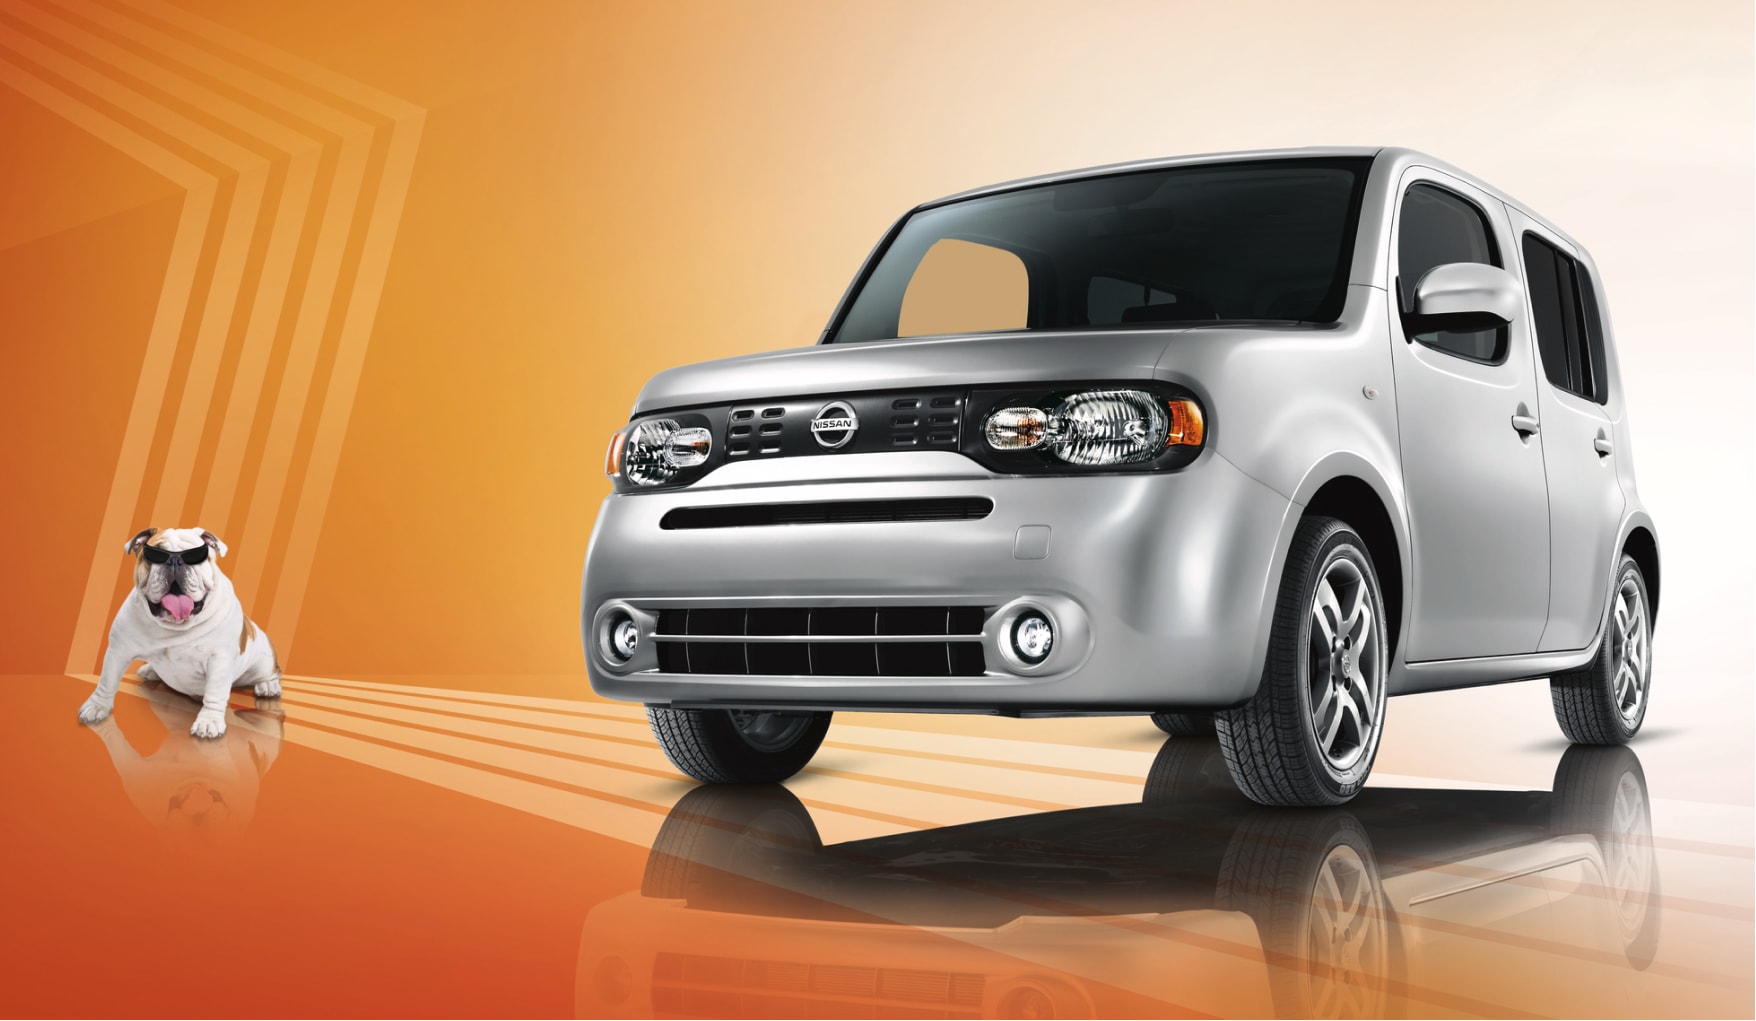 Front view of Nissan Cube design on orange background next to pitbull wearing sunglasses